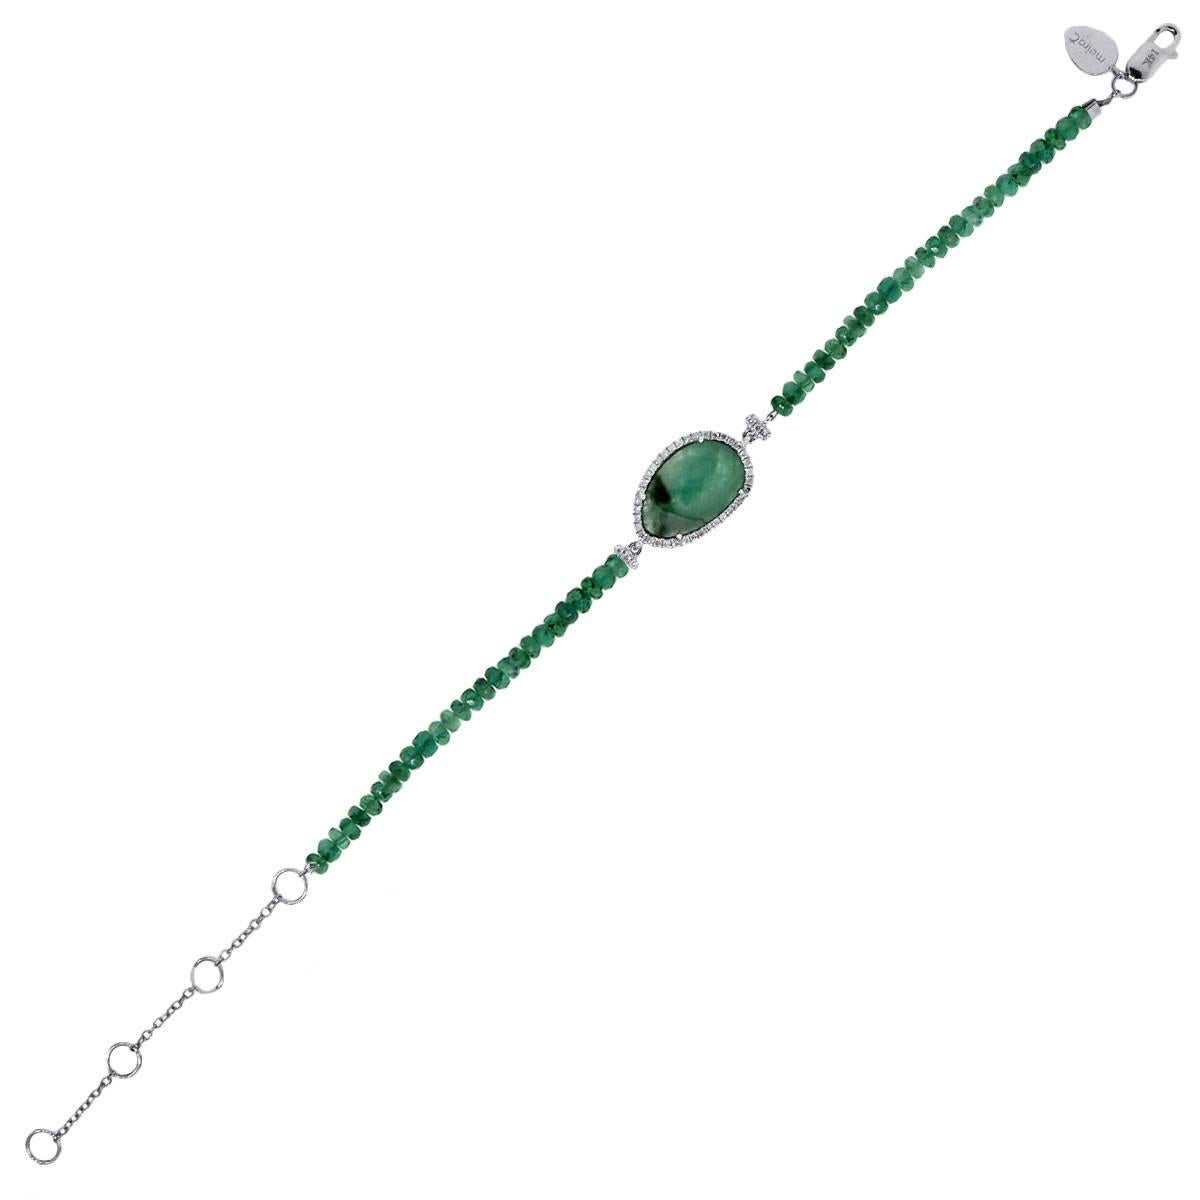 Designer: Meira T
Style: Emerald and diamond bracelet
Material: 14k White Gold
Diamond Details: Approximately .016ctw of round brilliant diamonds. Diamonds are G/H in color and SI in clarity
Gemstone Details: Approximately 2.55ctw emerald